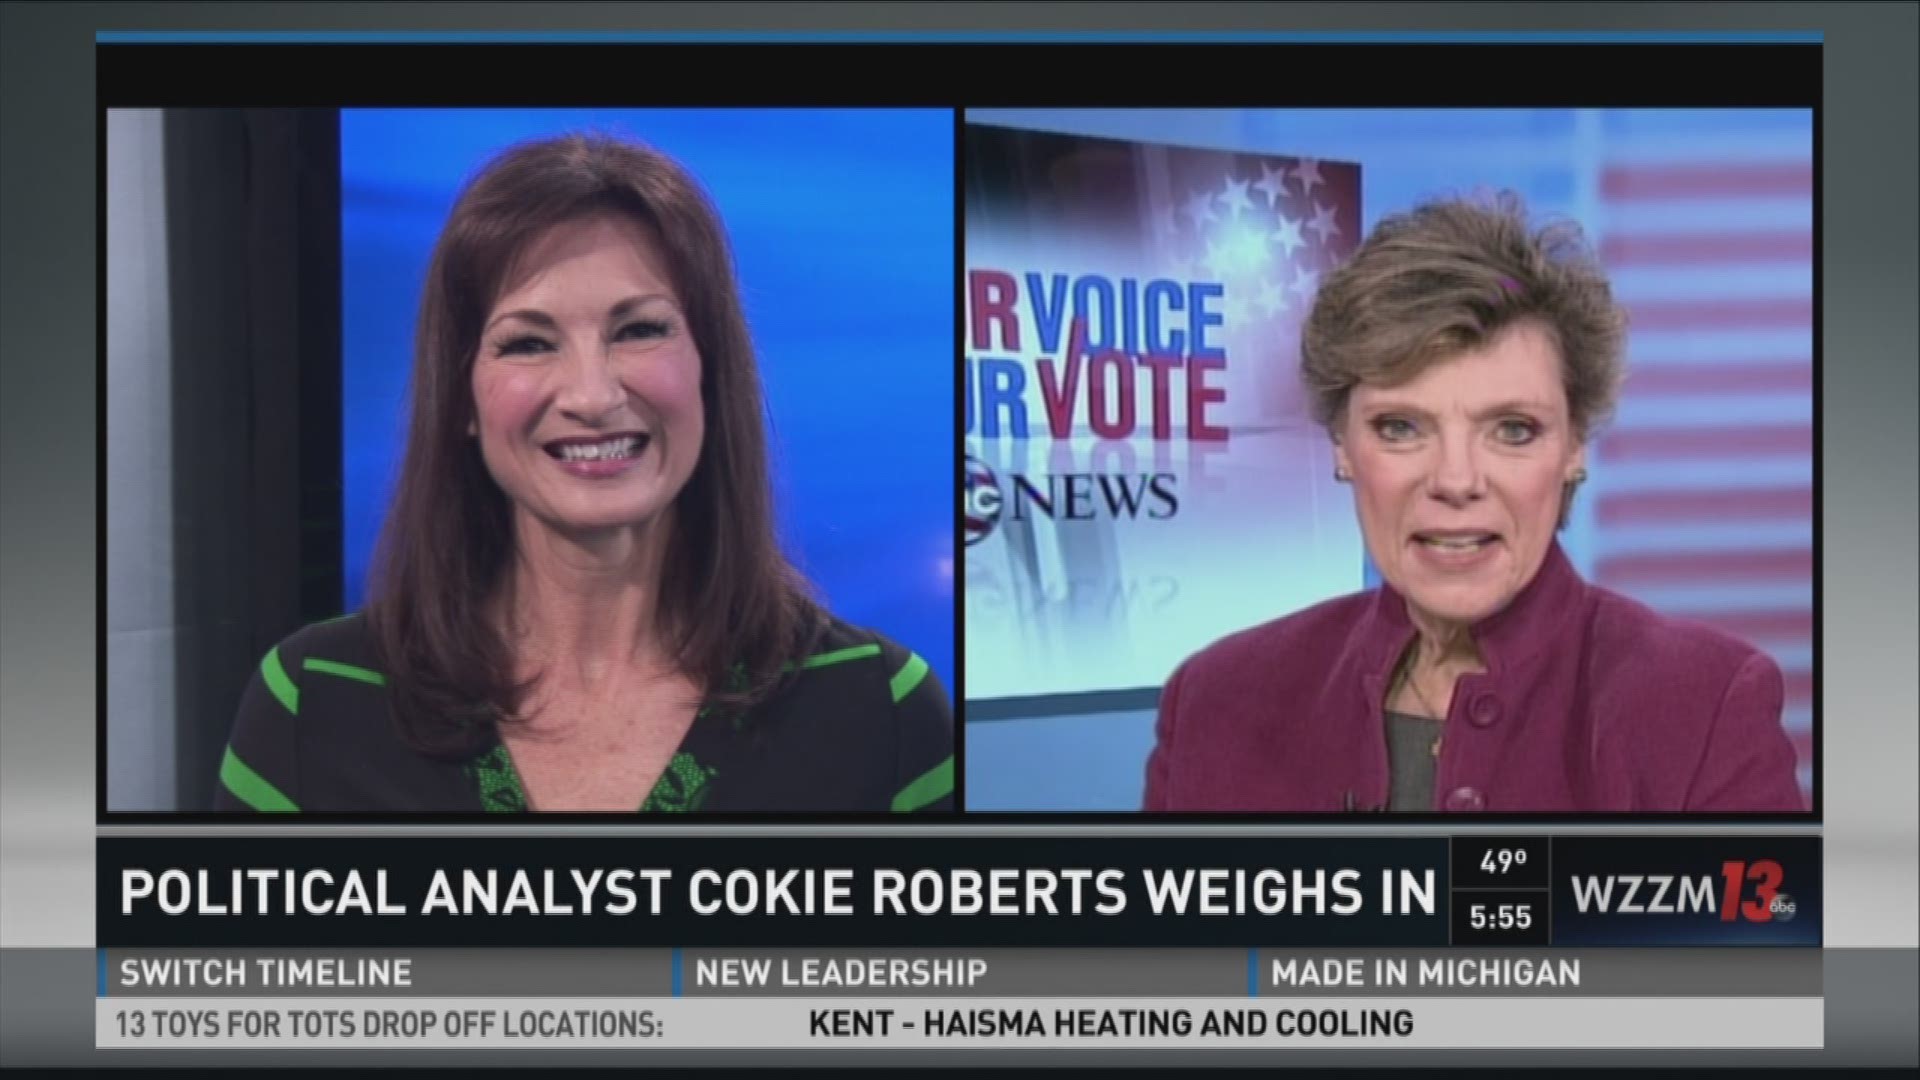 Cokie Roberts offers analysis on 2016 presidential race